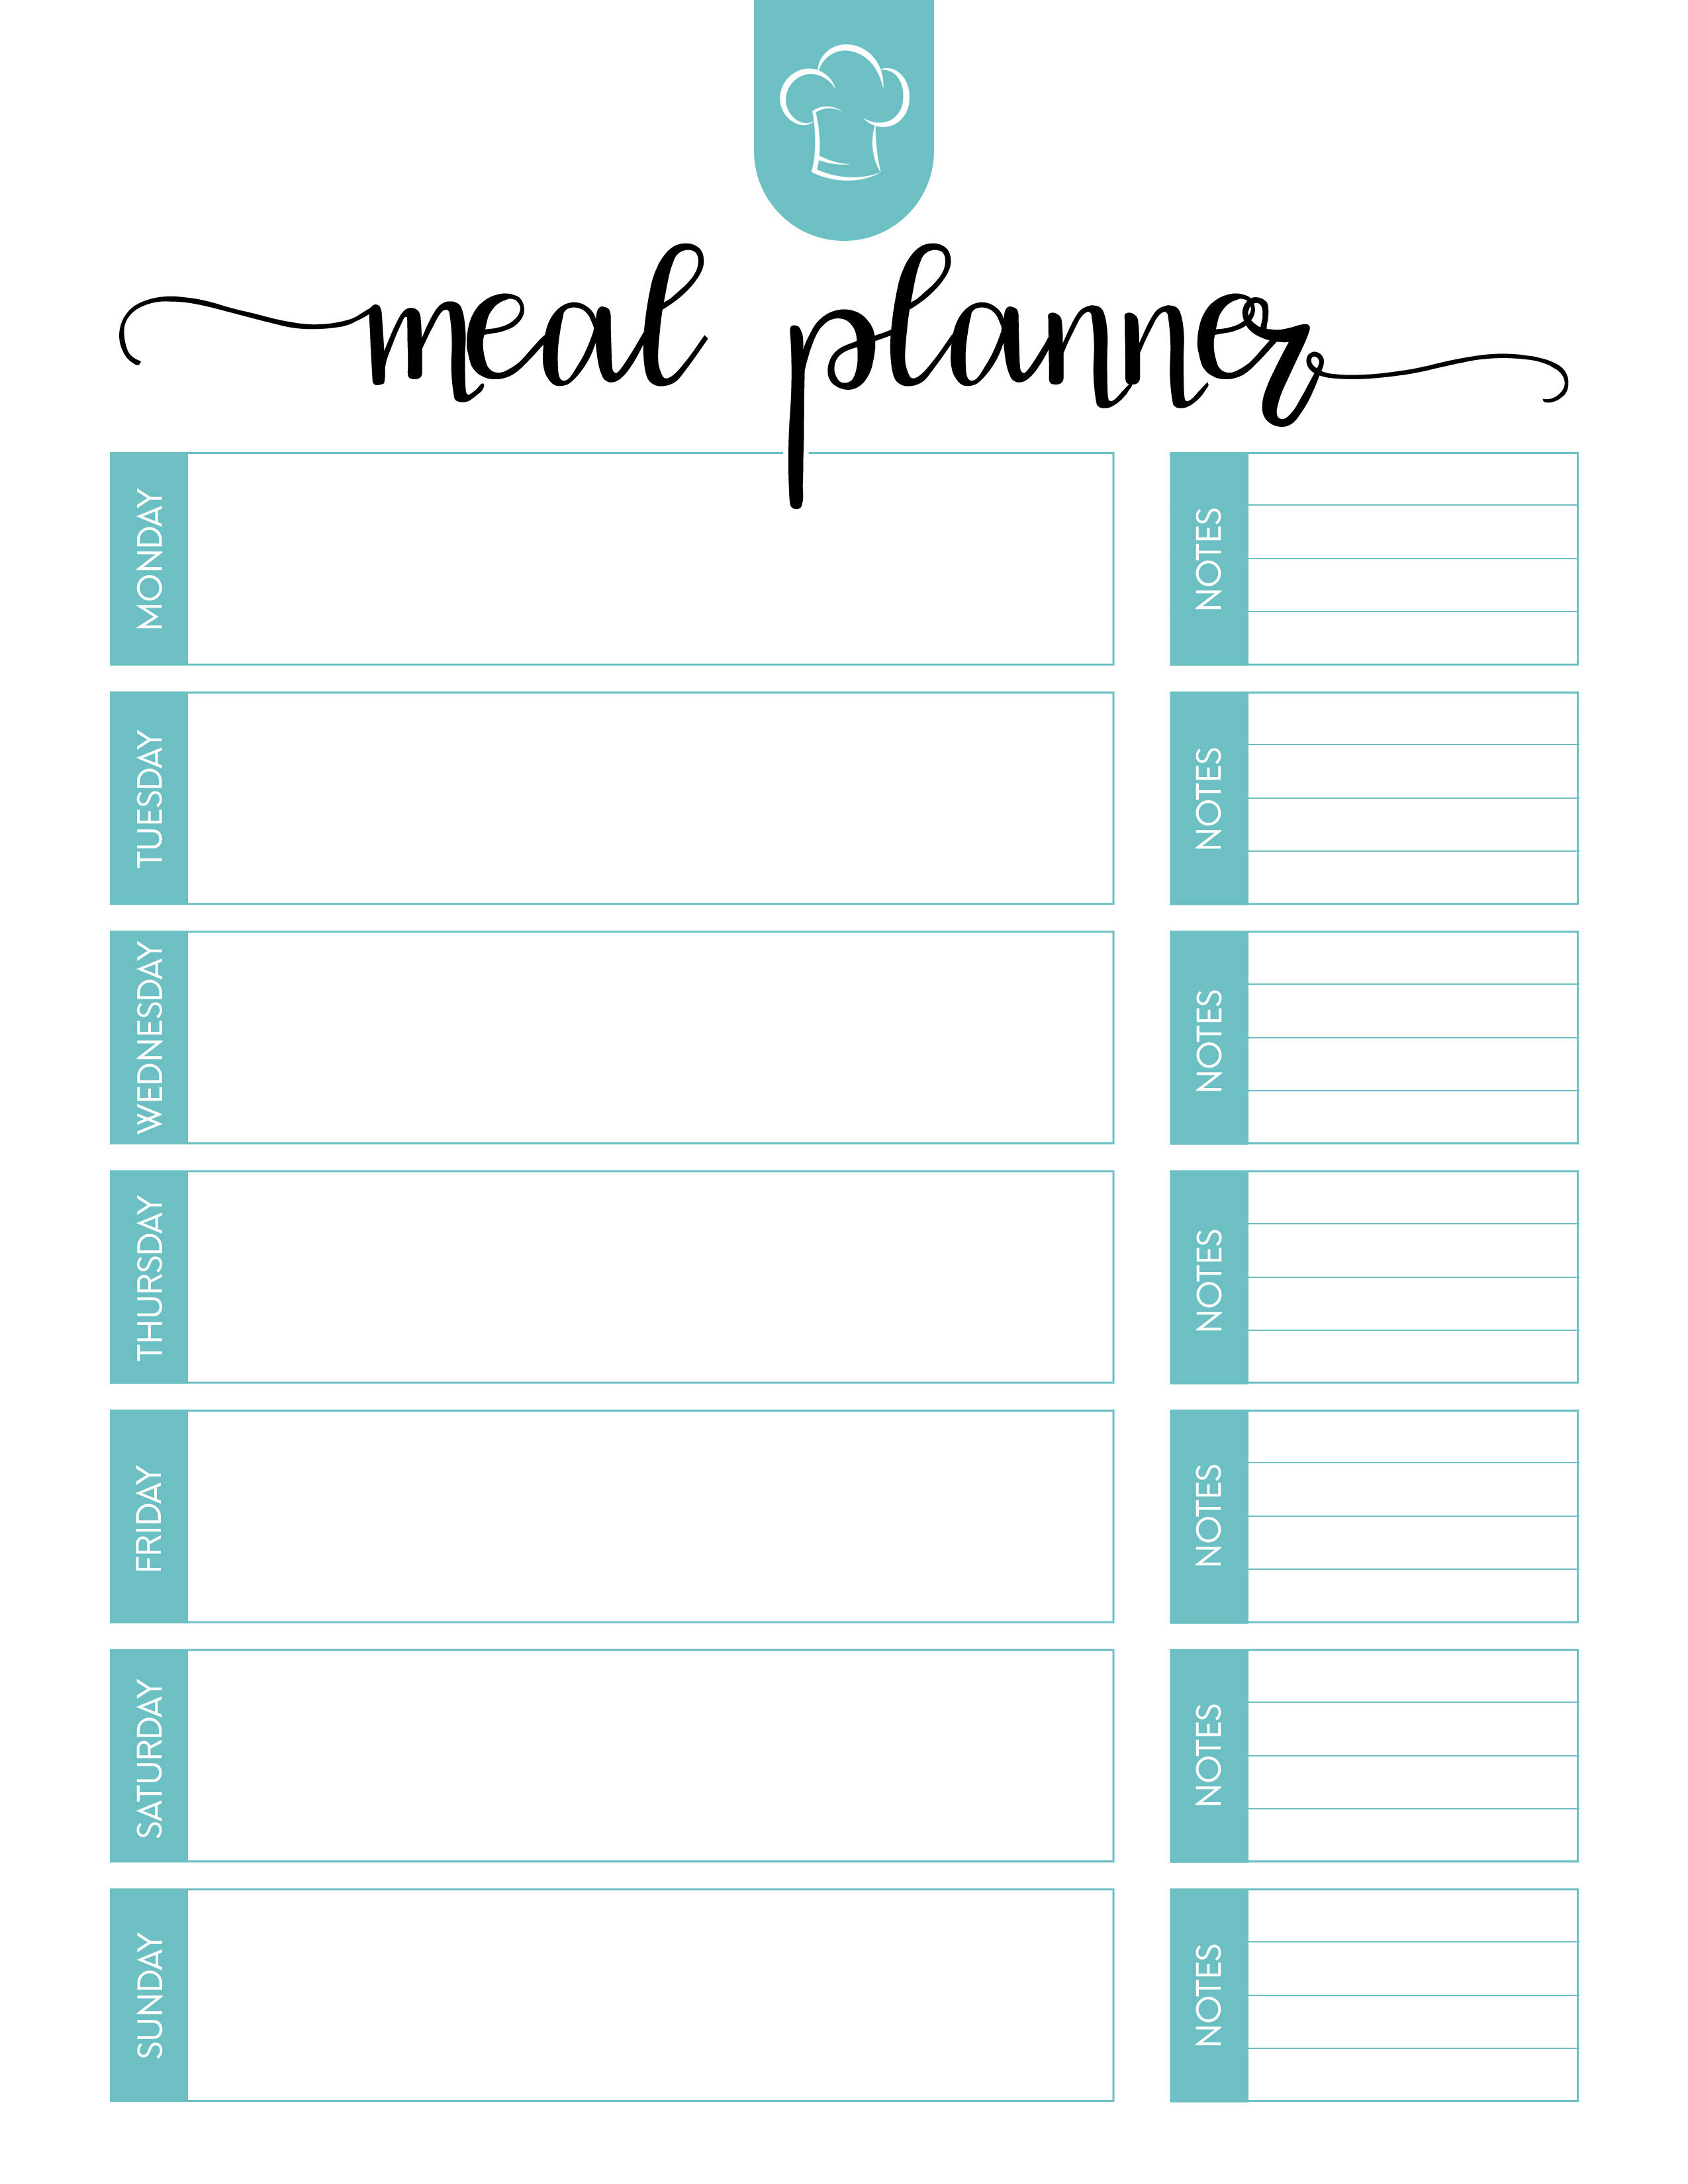 free-printable-meal-planner-set-the-cottage-market-weekly-meal